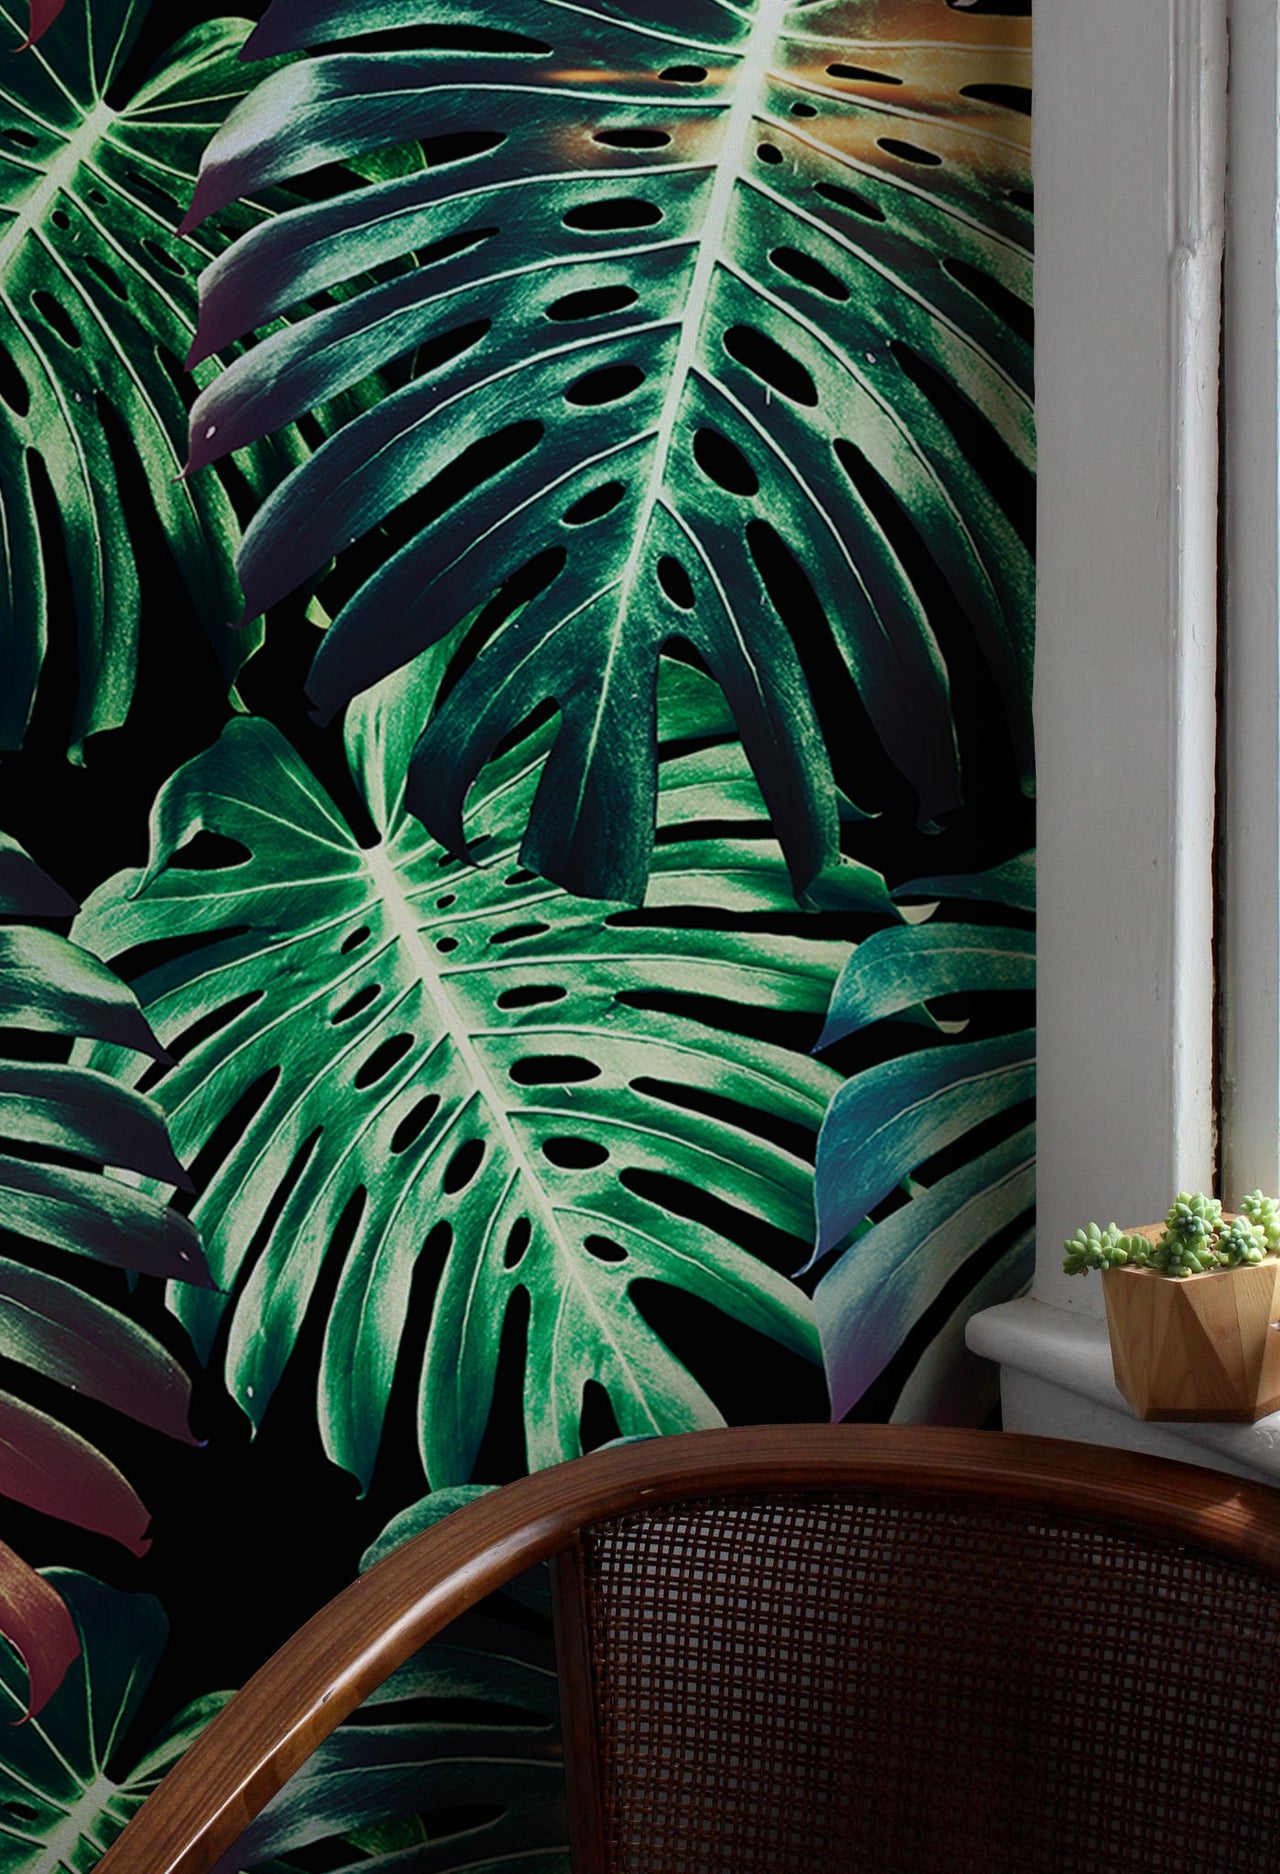 Wallpaper Peel and Stick Wallpaper Removable Wallpaper Home Decor Wall Art Wall Decor Room Decor / Tropical Monstera Leaves Wallpaper - B116